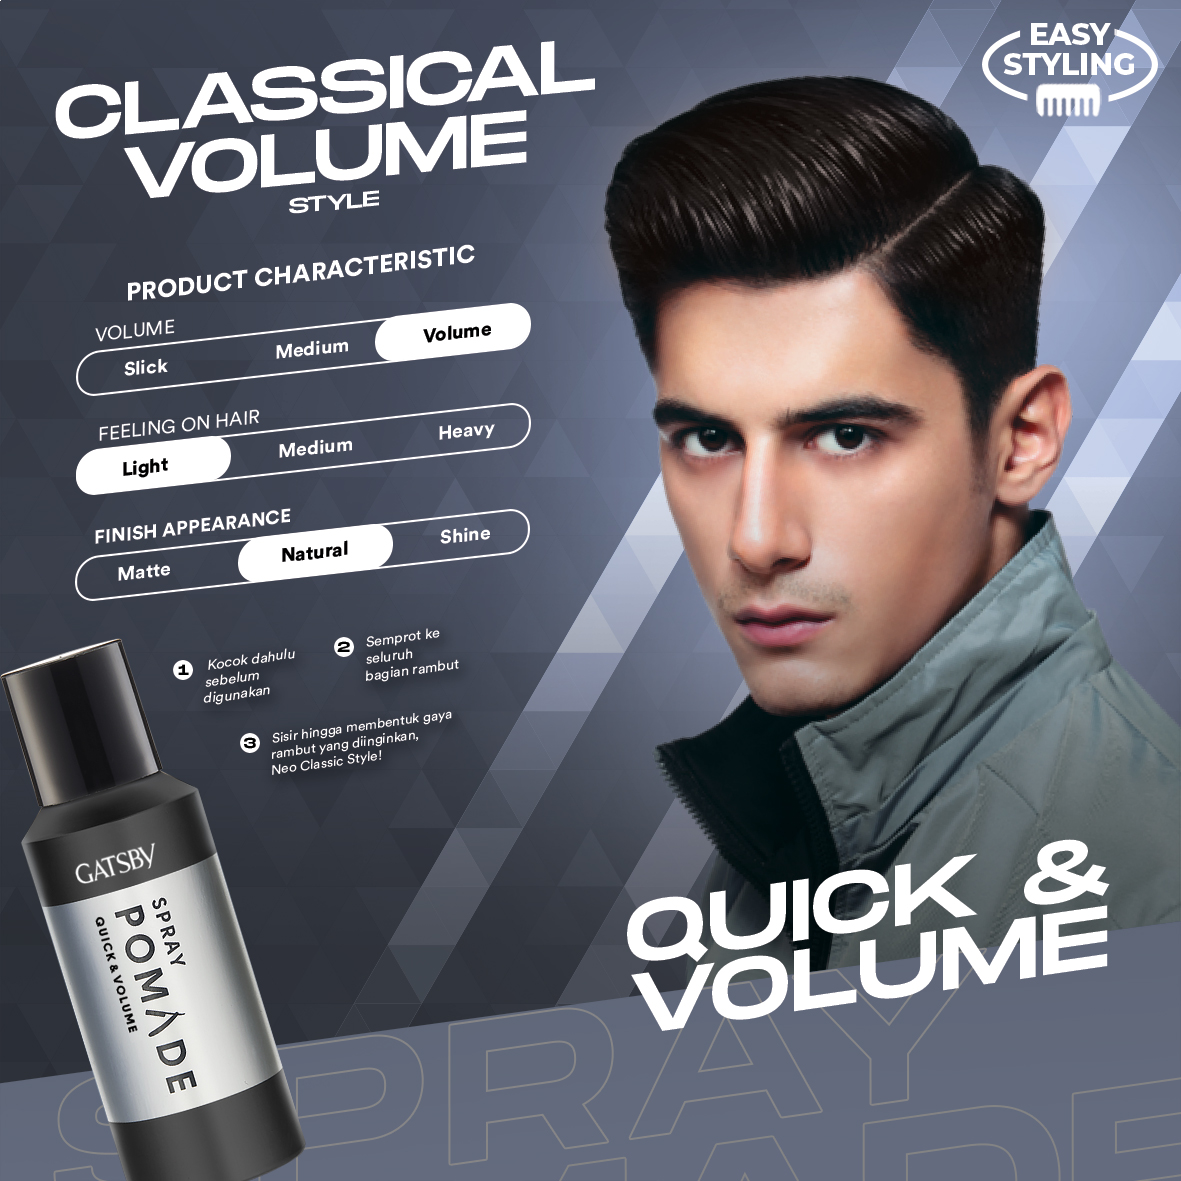 STYLING POMADE QUICK AND VOLUME - Gatsby